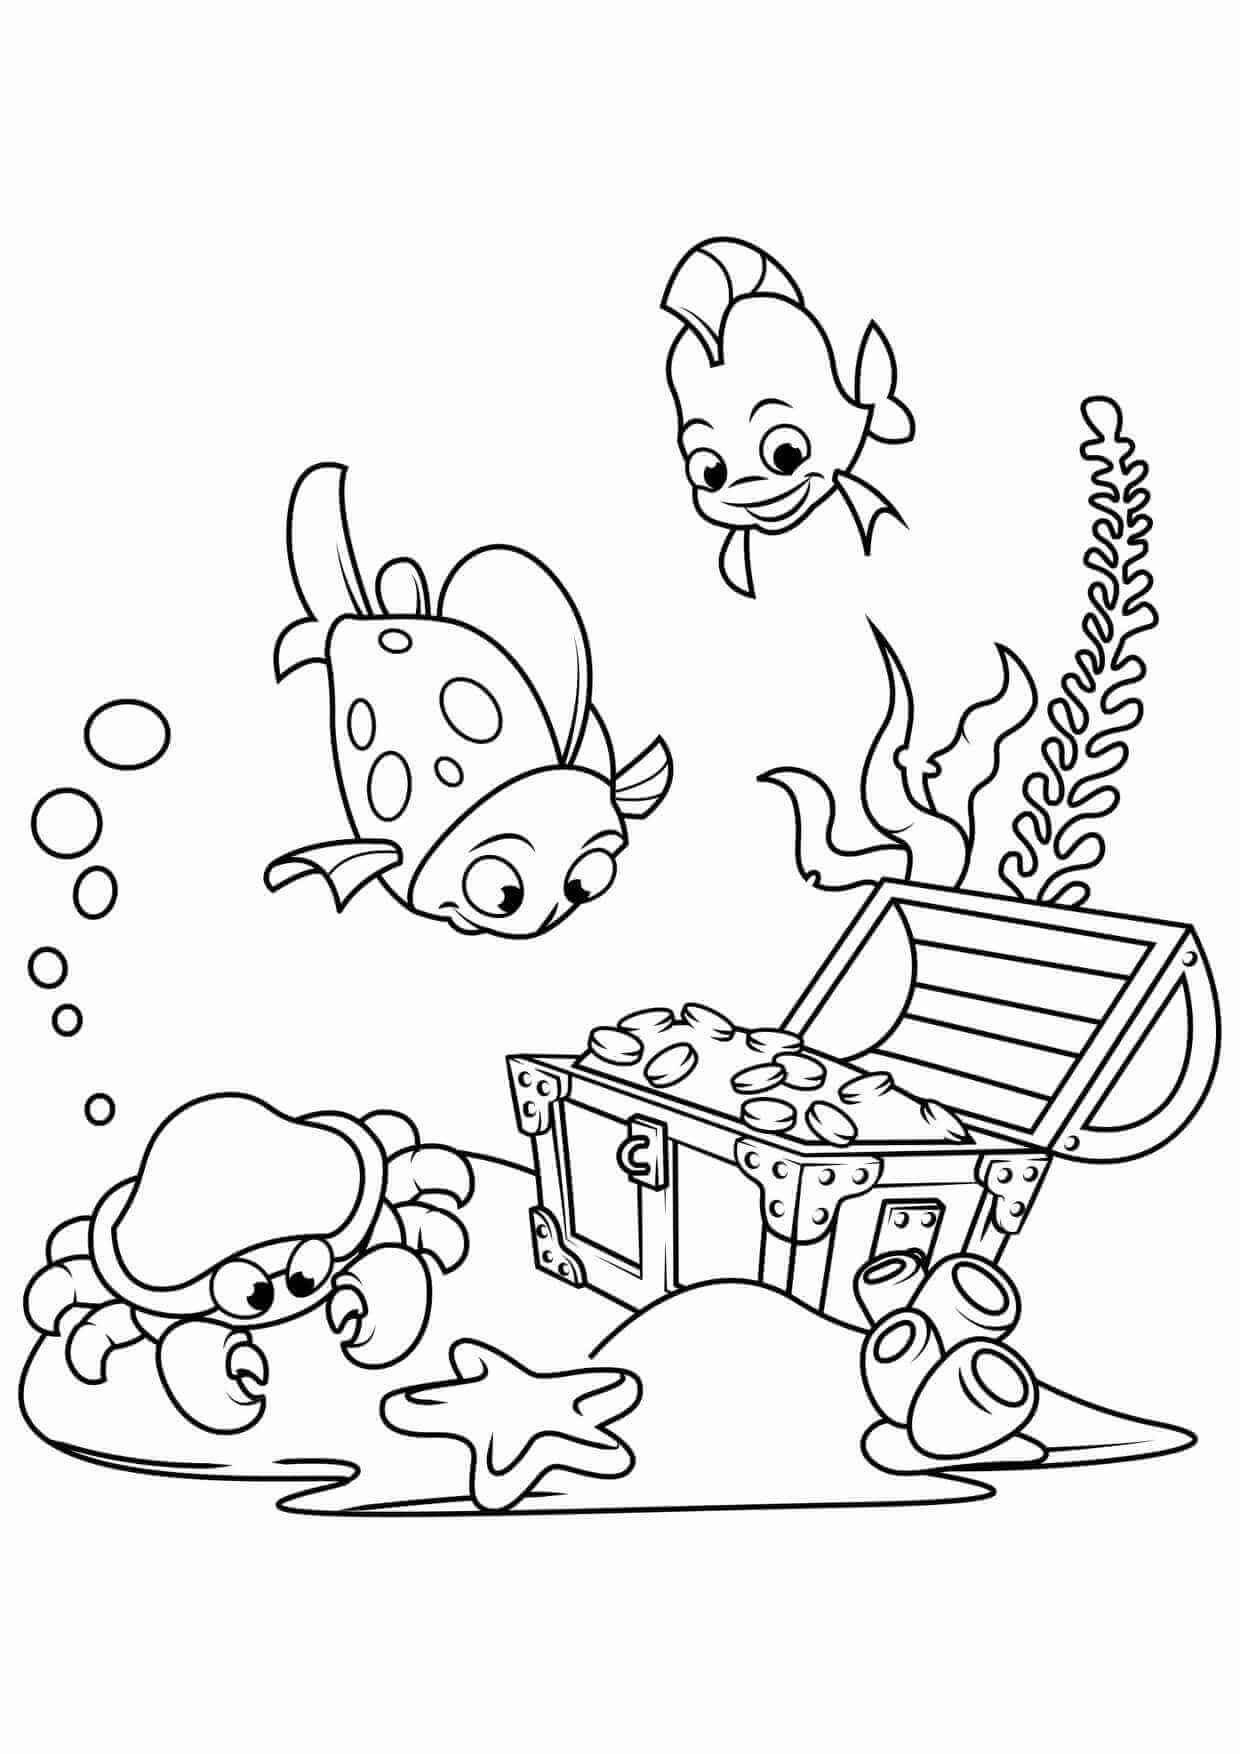 Girls Coloring Sheets
 Free Printable Coloring Pages For Girls